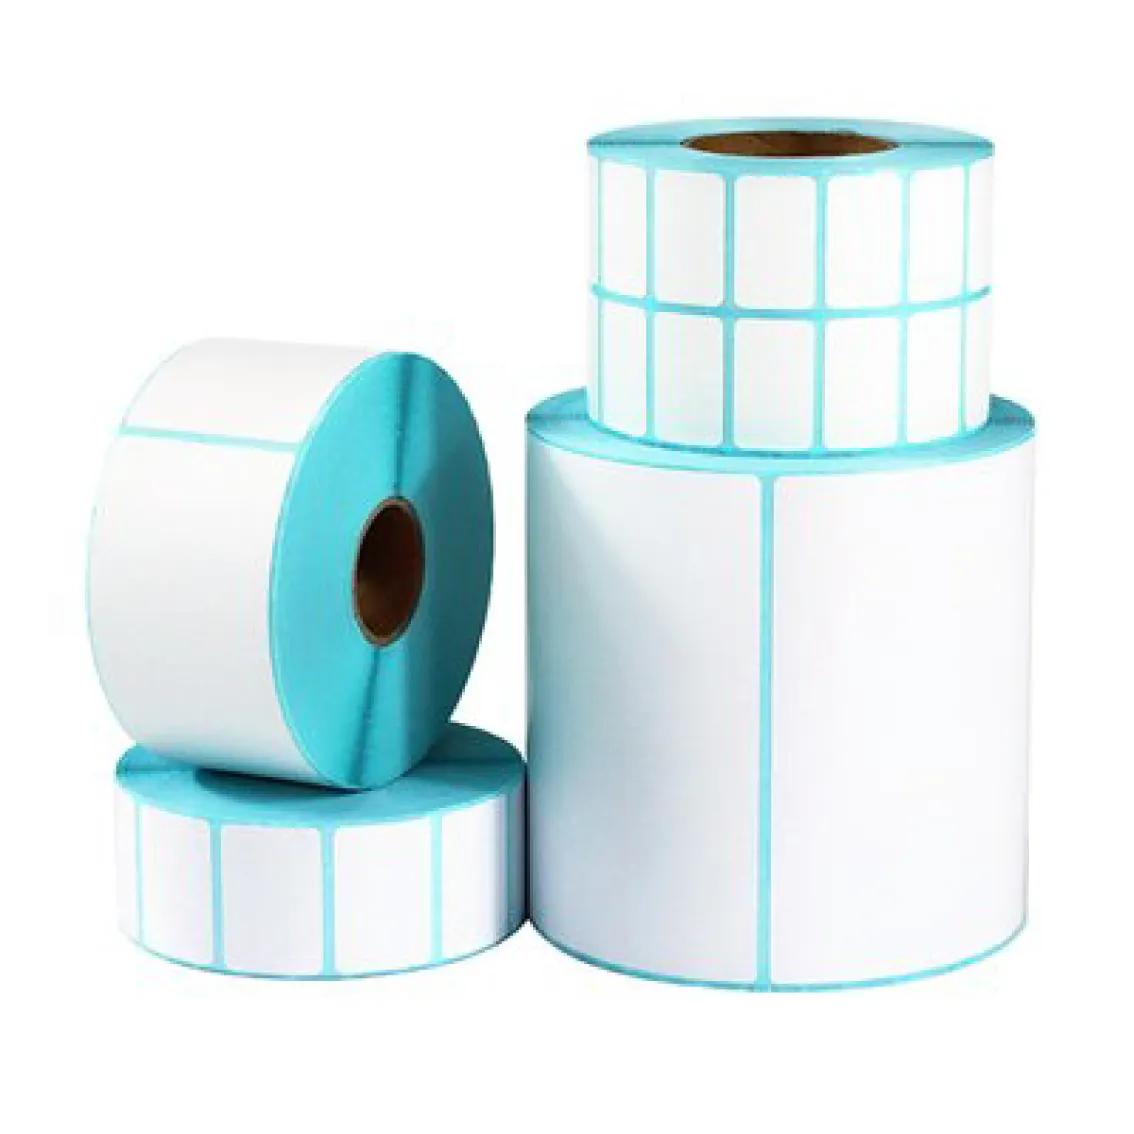 Factory Wholesale Blank White Custom Printing Direct Thermal Barcode Paper Labels Sticker Rolls